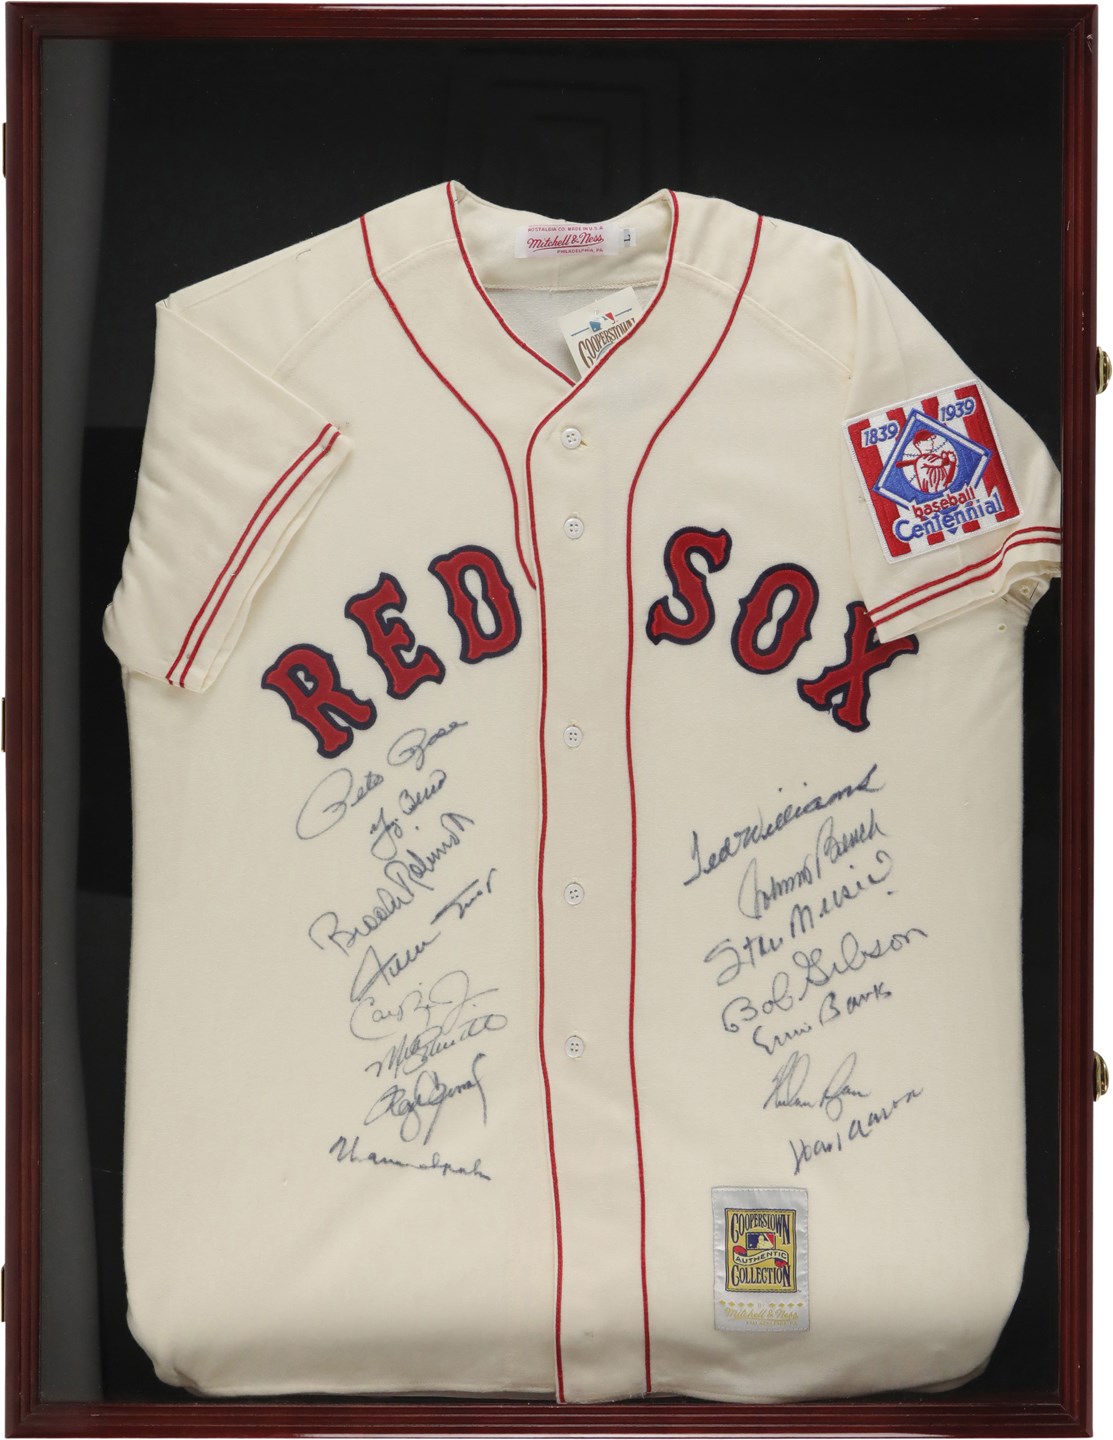 Baseball All-Century Team Signed Commemorative Jersey - 15 Signatures Including Williams, Aaron, and Mays (PSA)